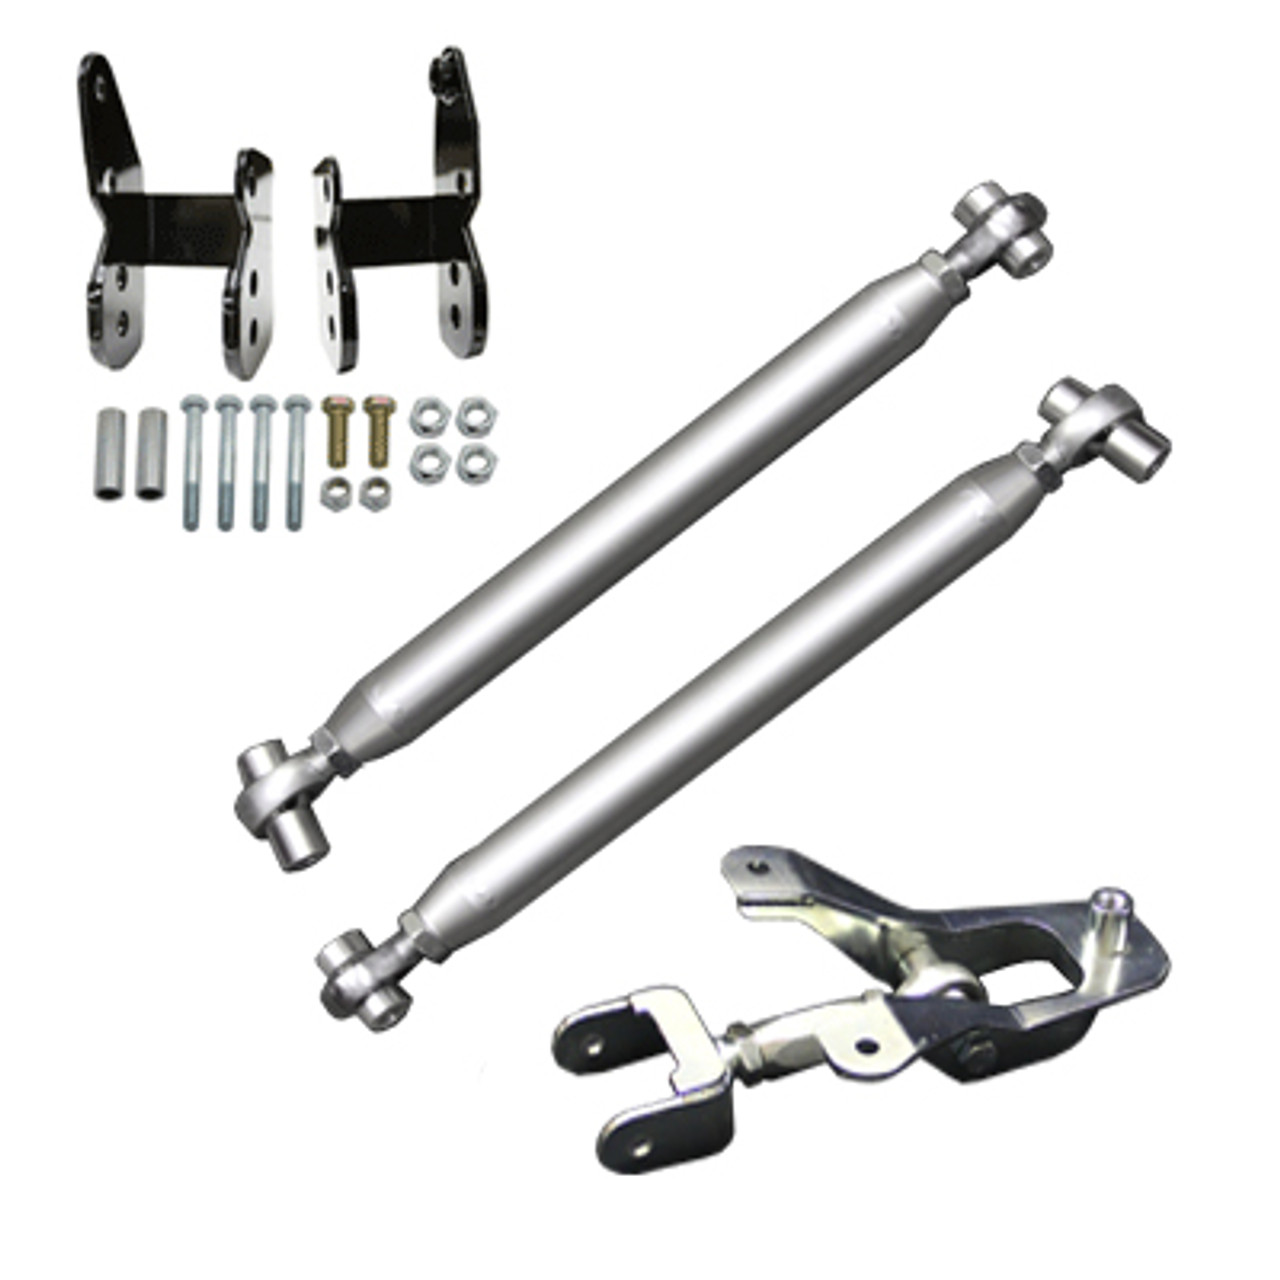 11-14 Mustang 5.0L Pro-Series Rear Suspension Package